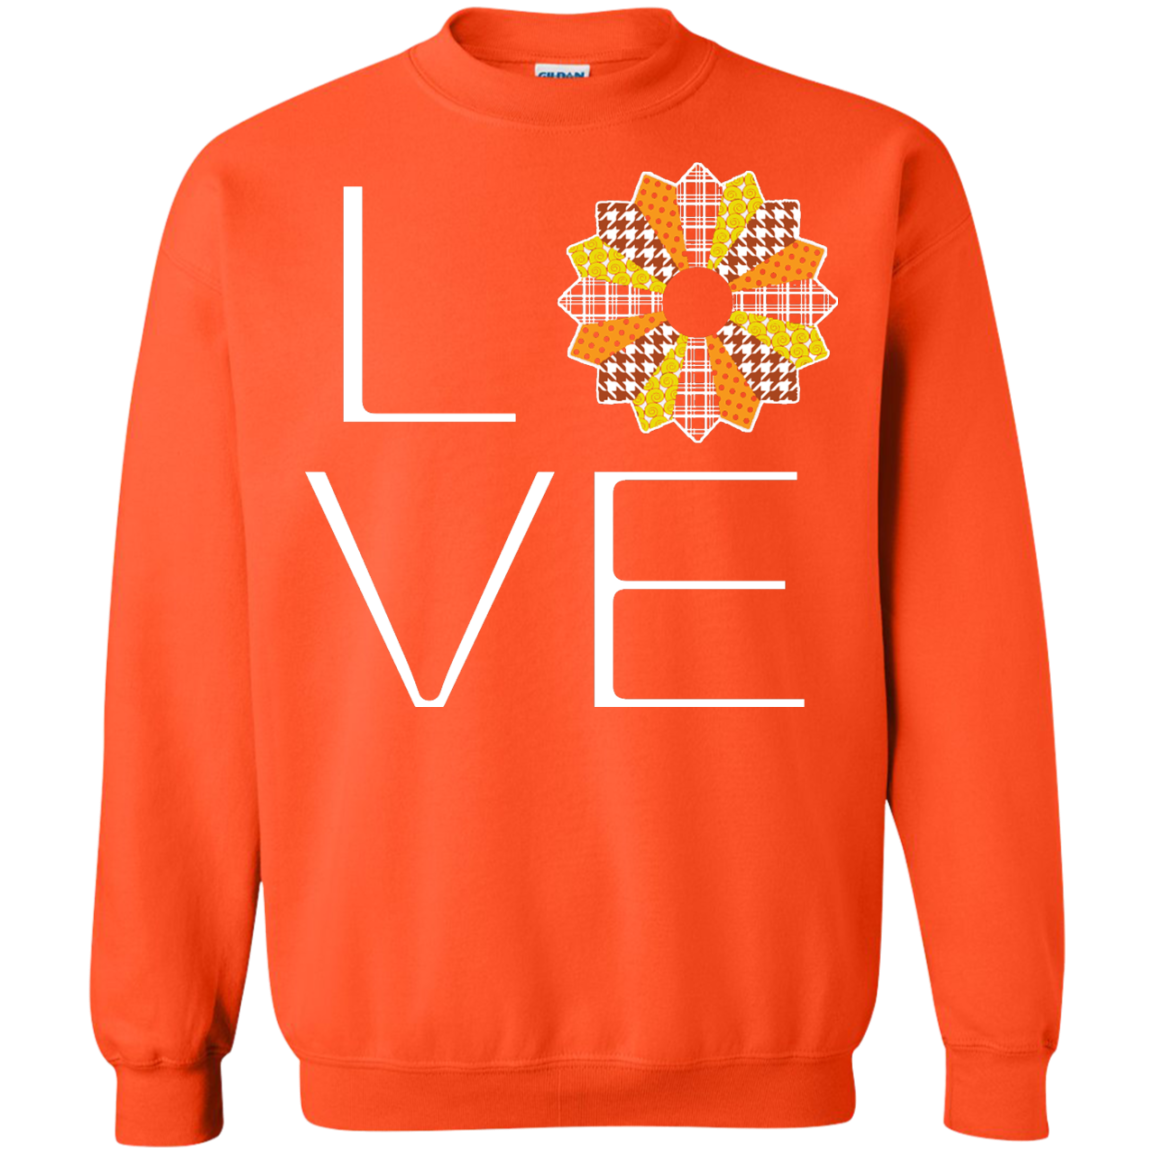 LOVE Quilting (Fall Colors) Crewneck Sweatshirts - Crafter4Life - 4